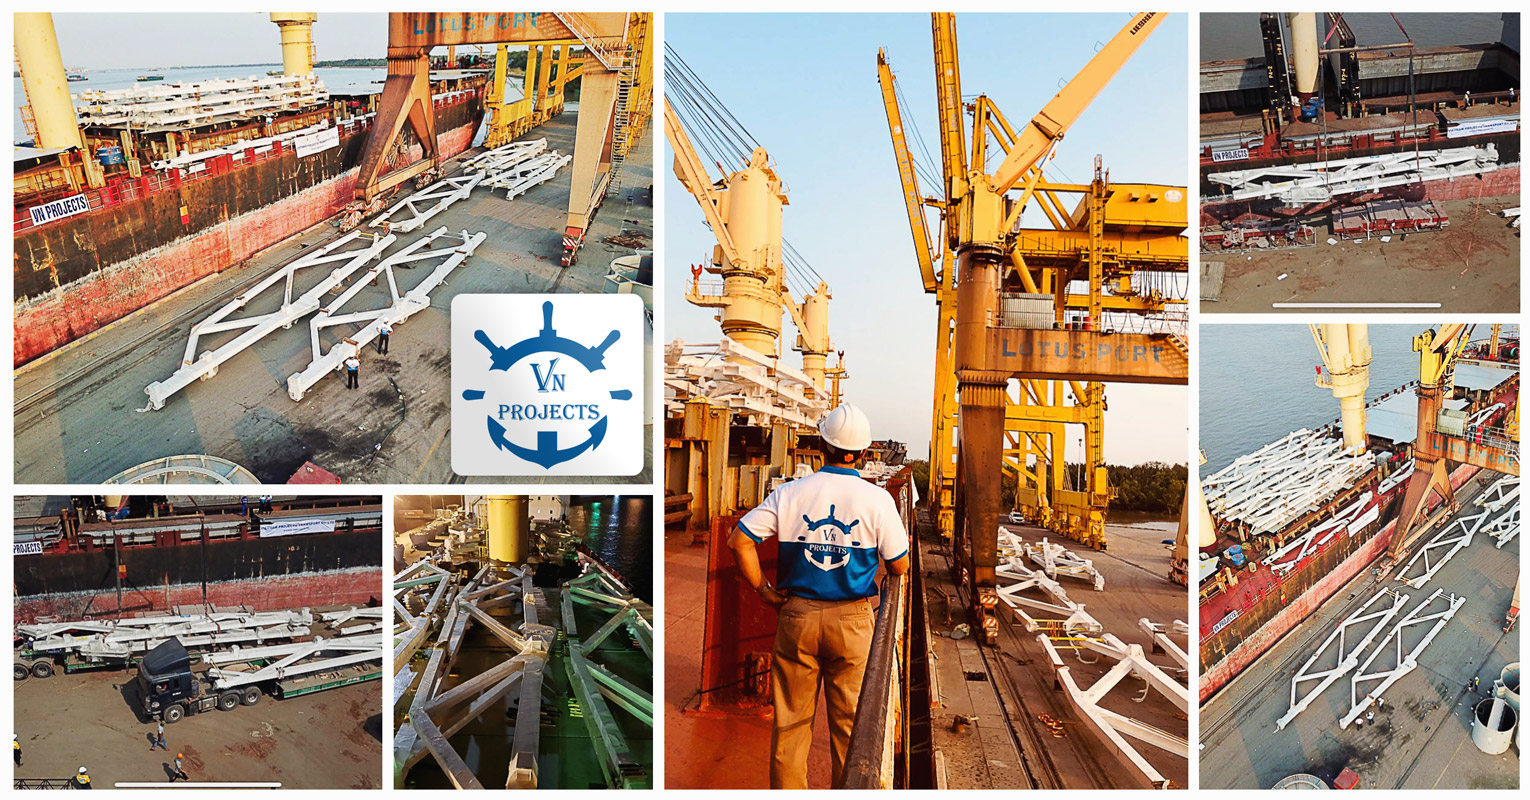 VN Projects chartered the full voyage for about 8000 cbm